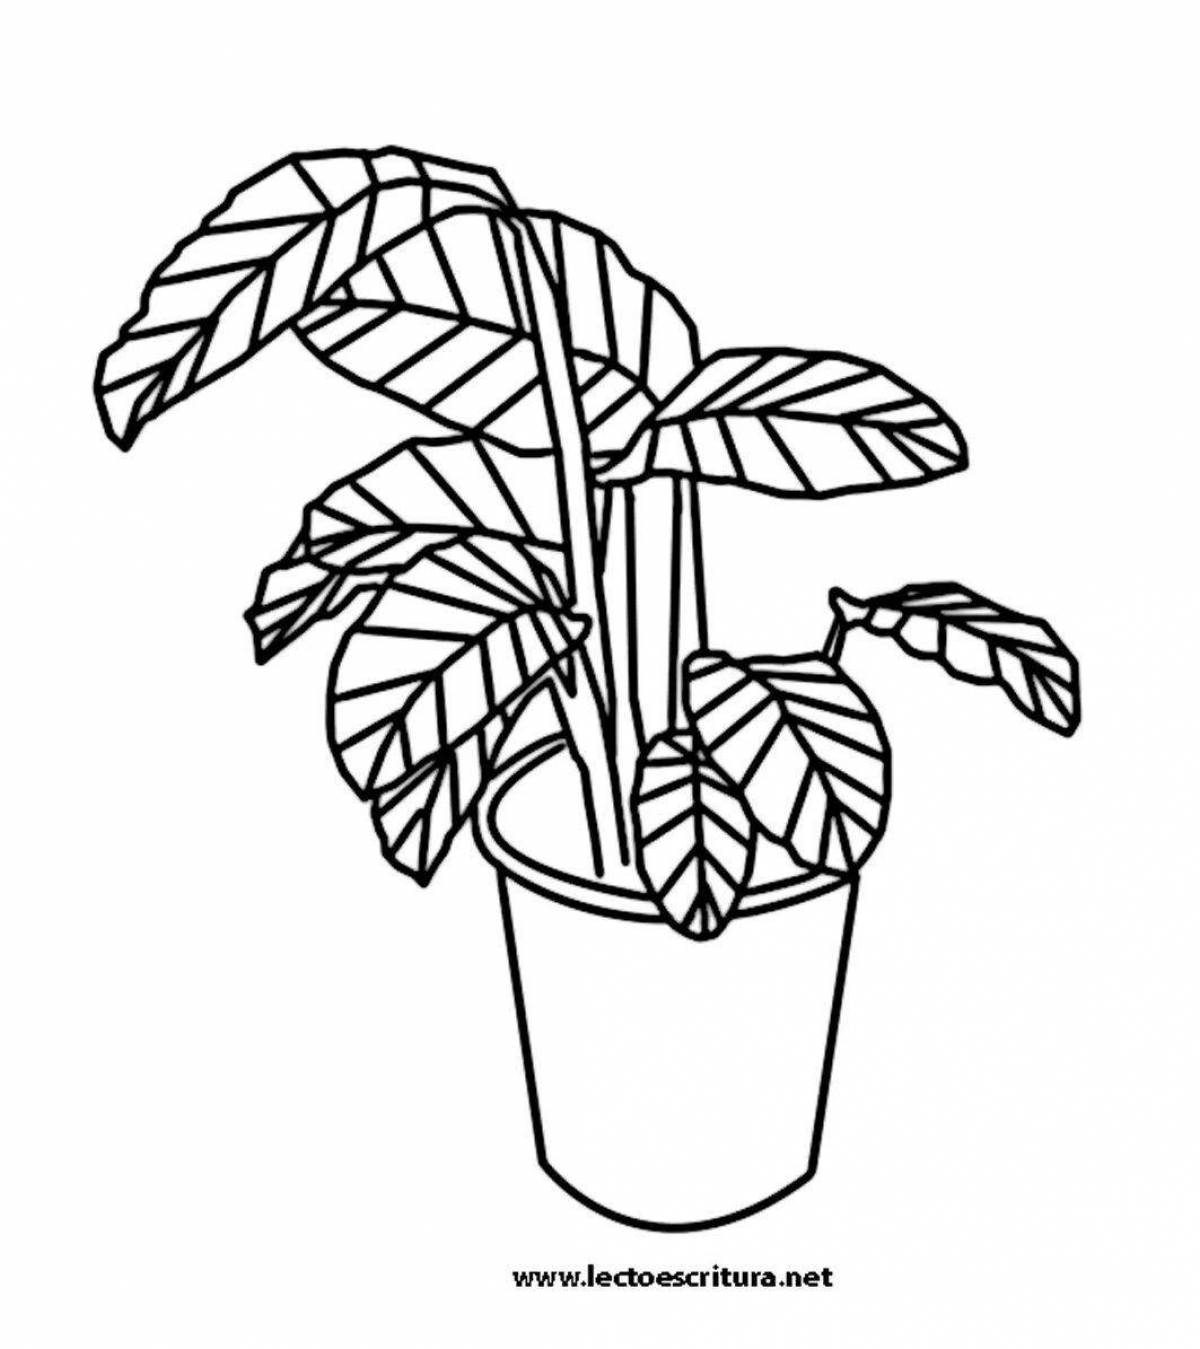 Fun coloring houseplants with names